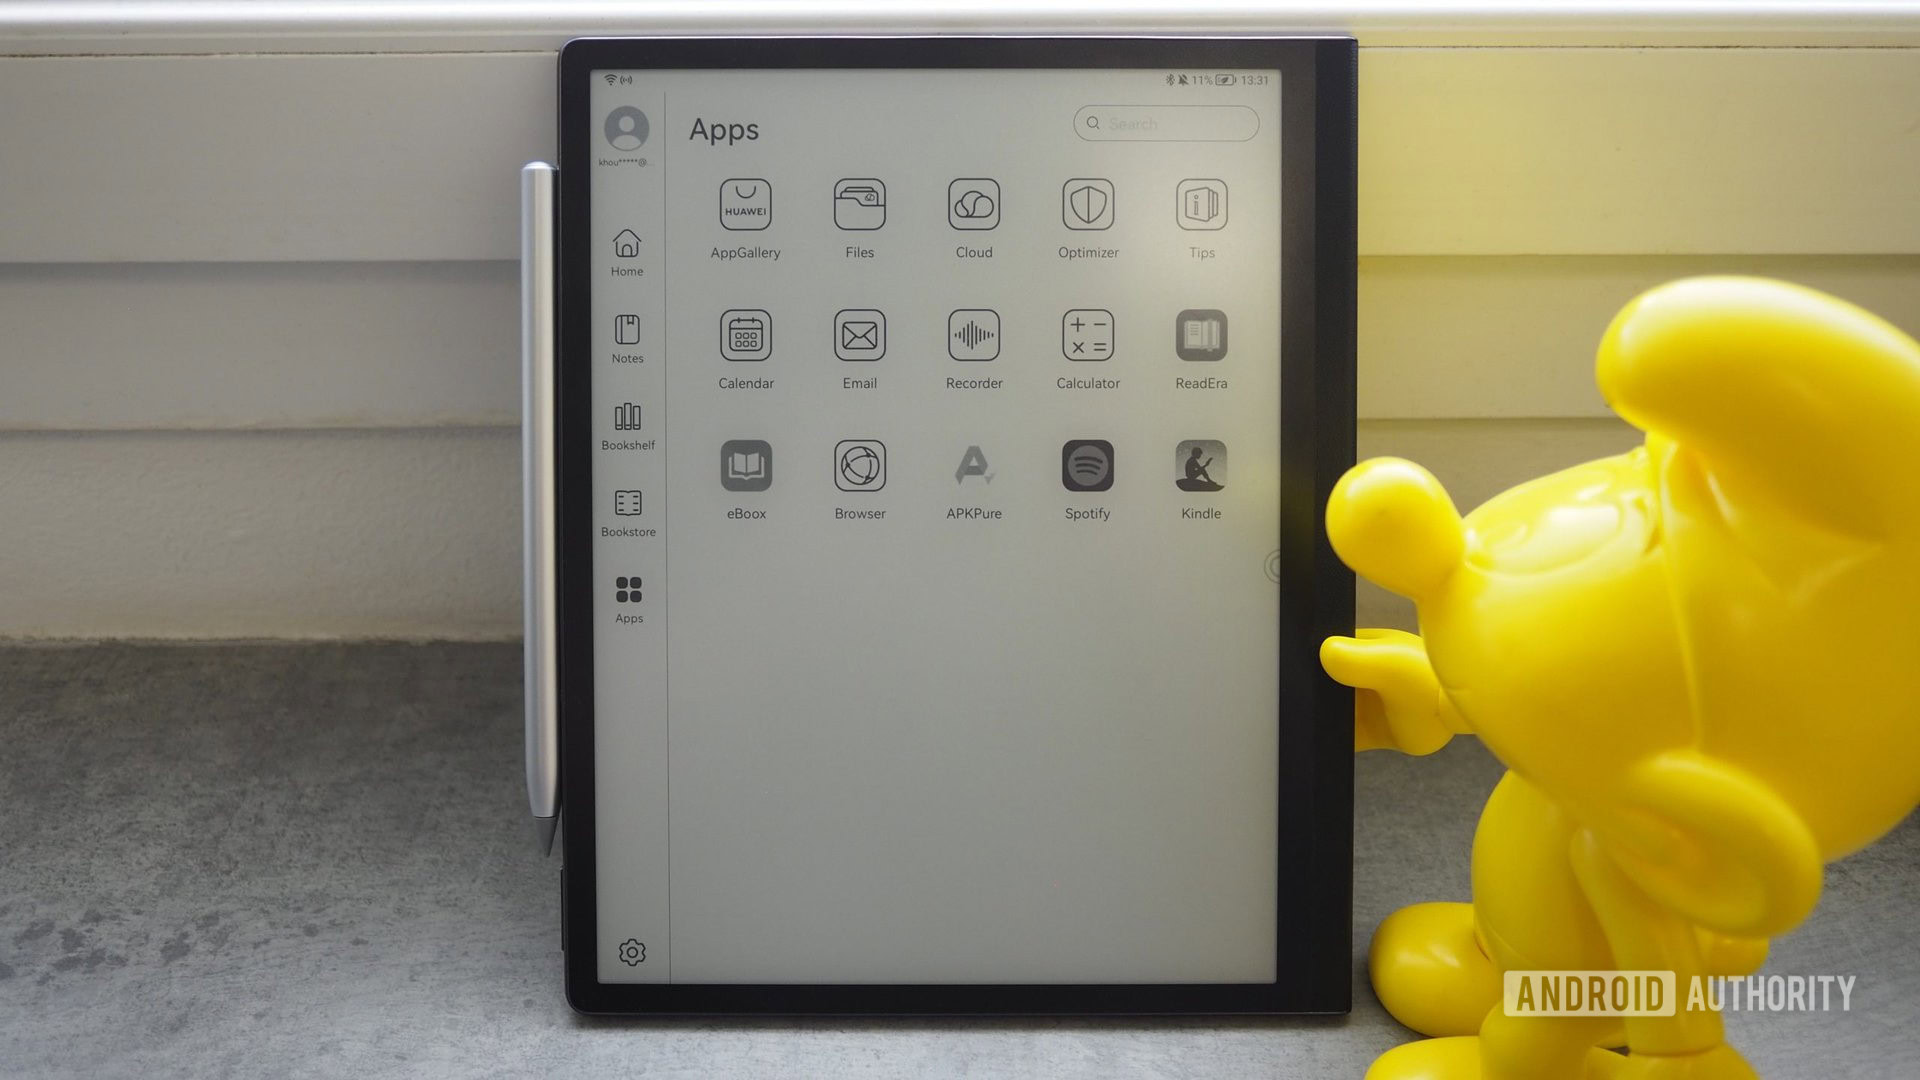 HUAWEI Matepad Paper review: Sorry, e ink and Android aren't a